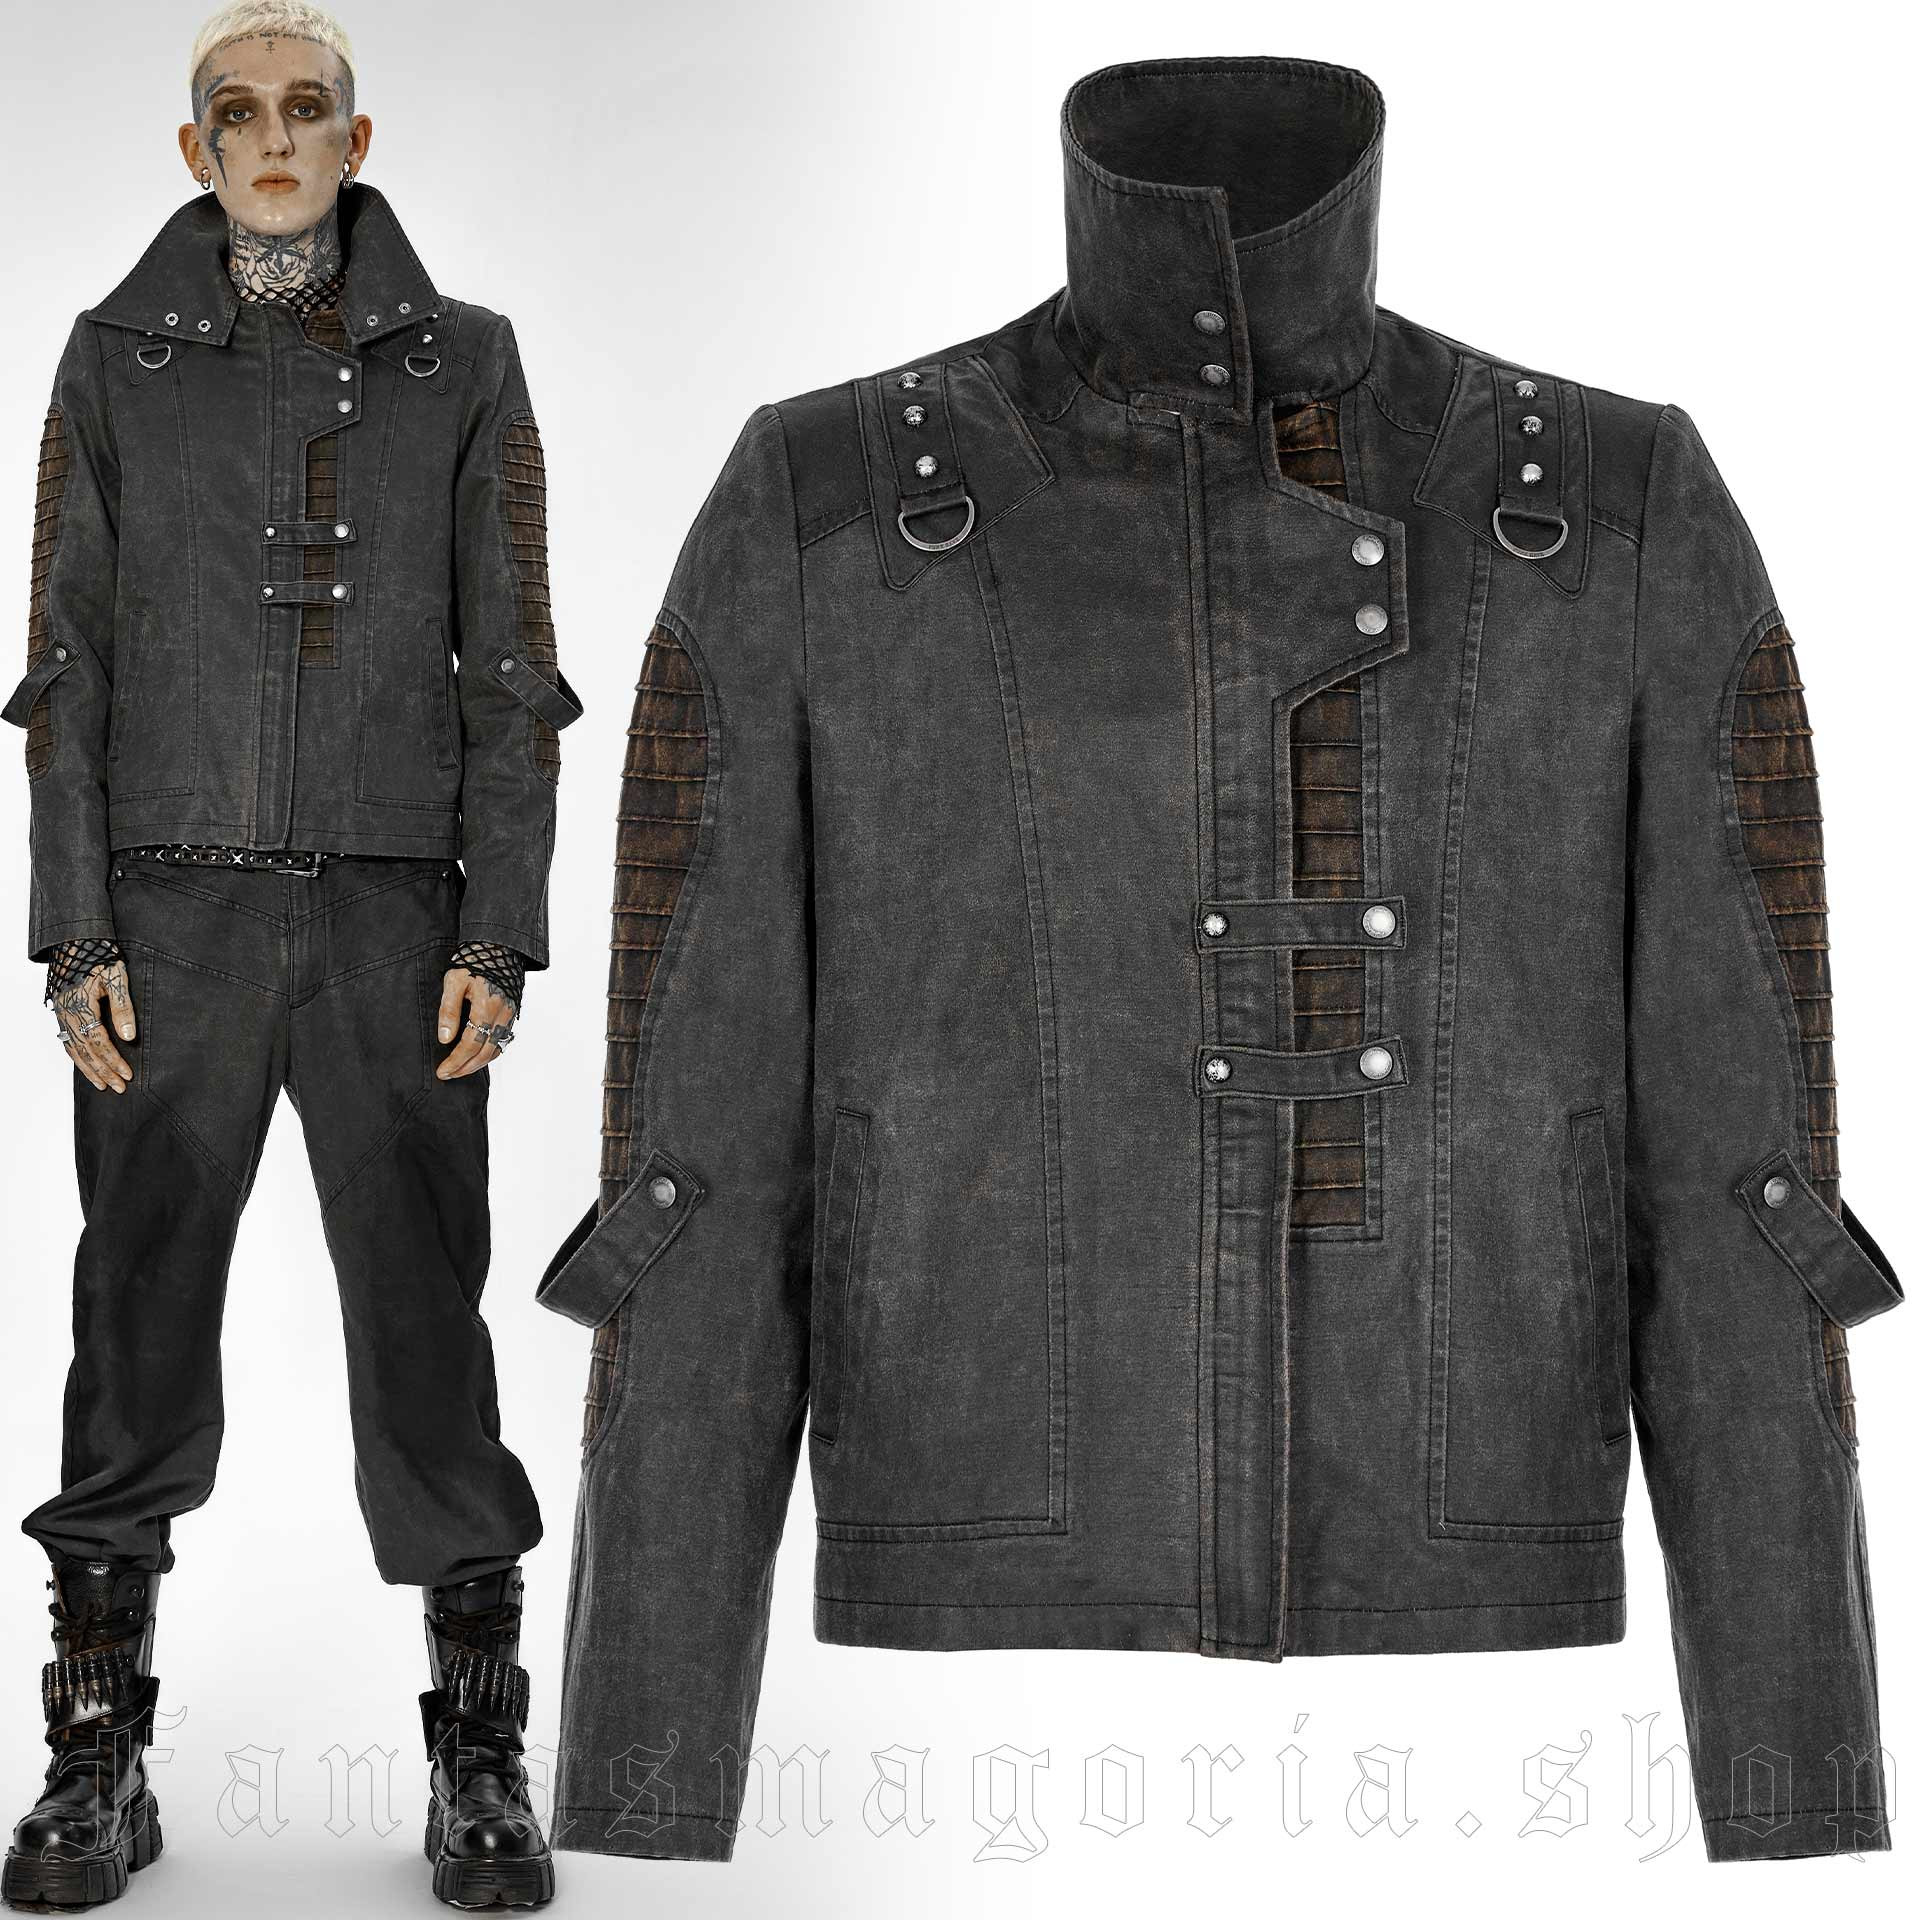 Dystopia Jacket - Punk Rave - WY-1445/GY-CO 1